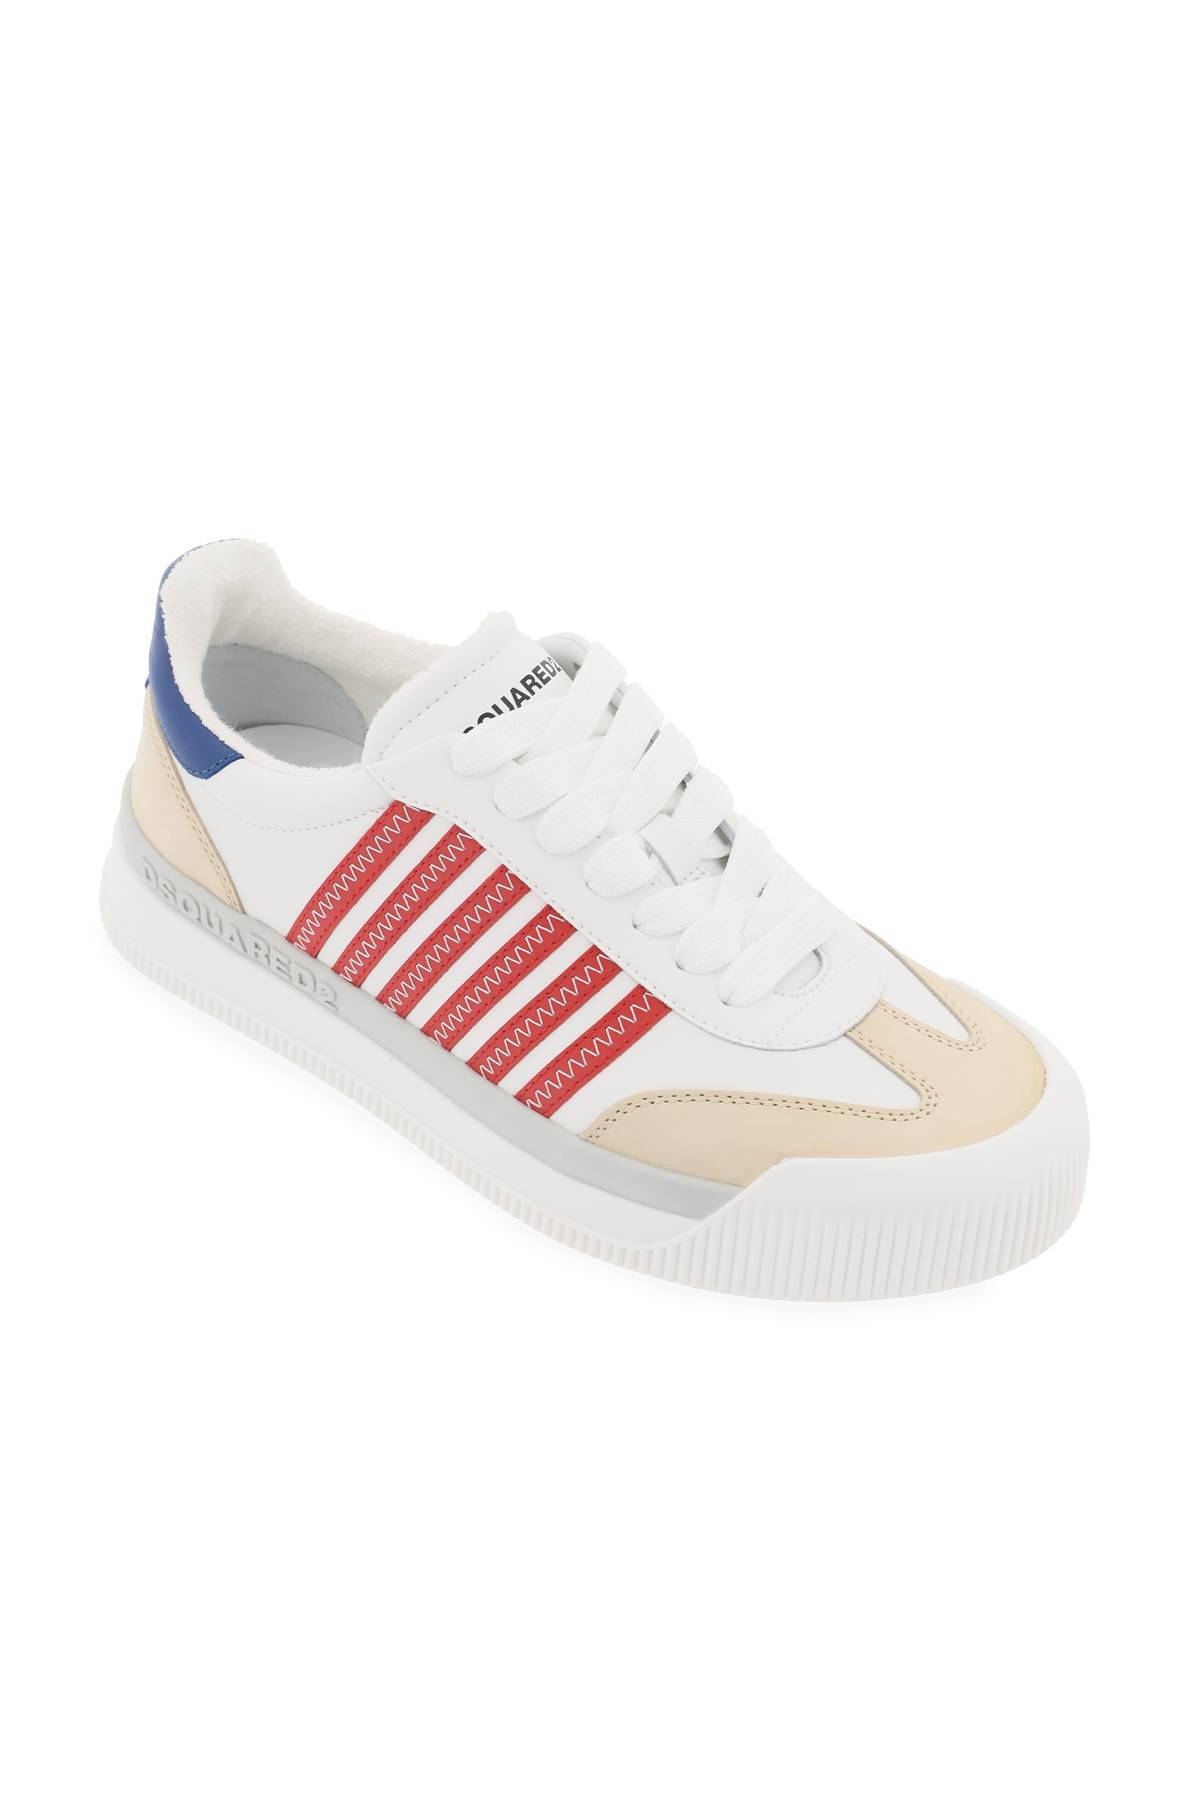 Shop Dsquared2 New Jersey Sneakers In White,blue,red